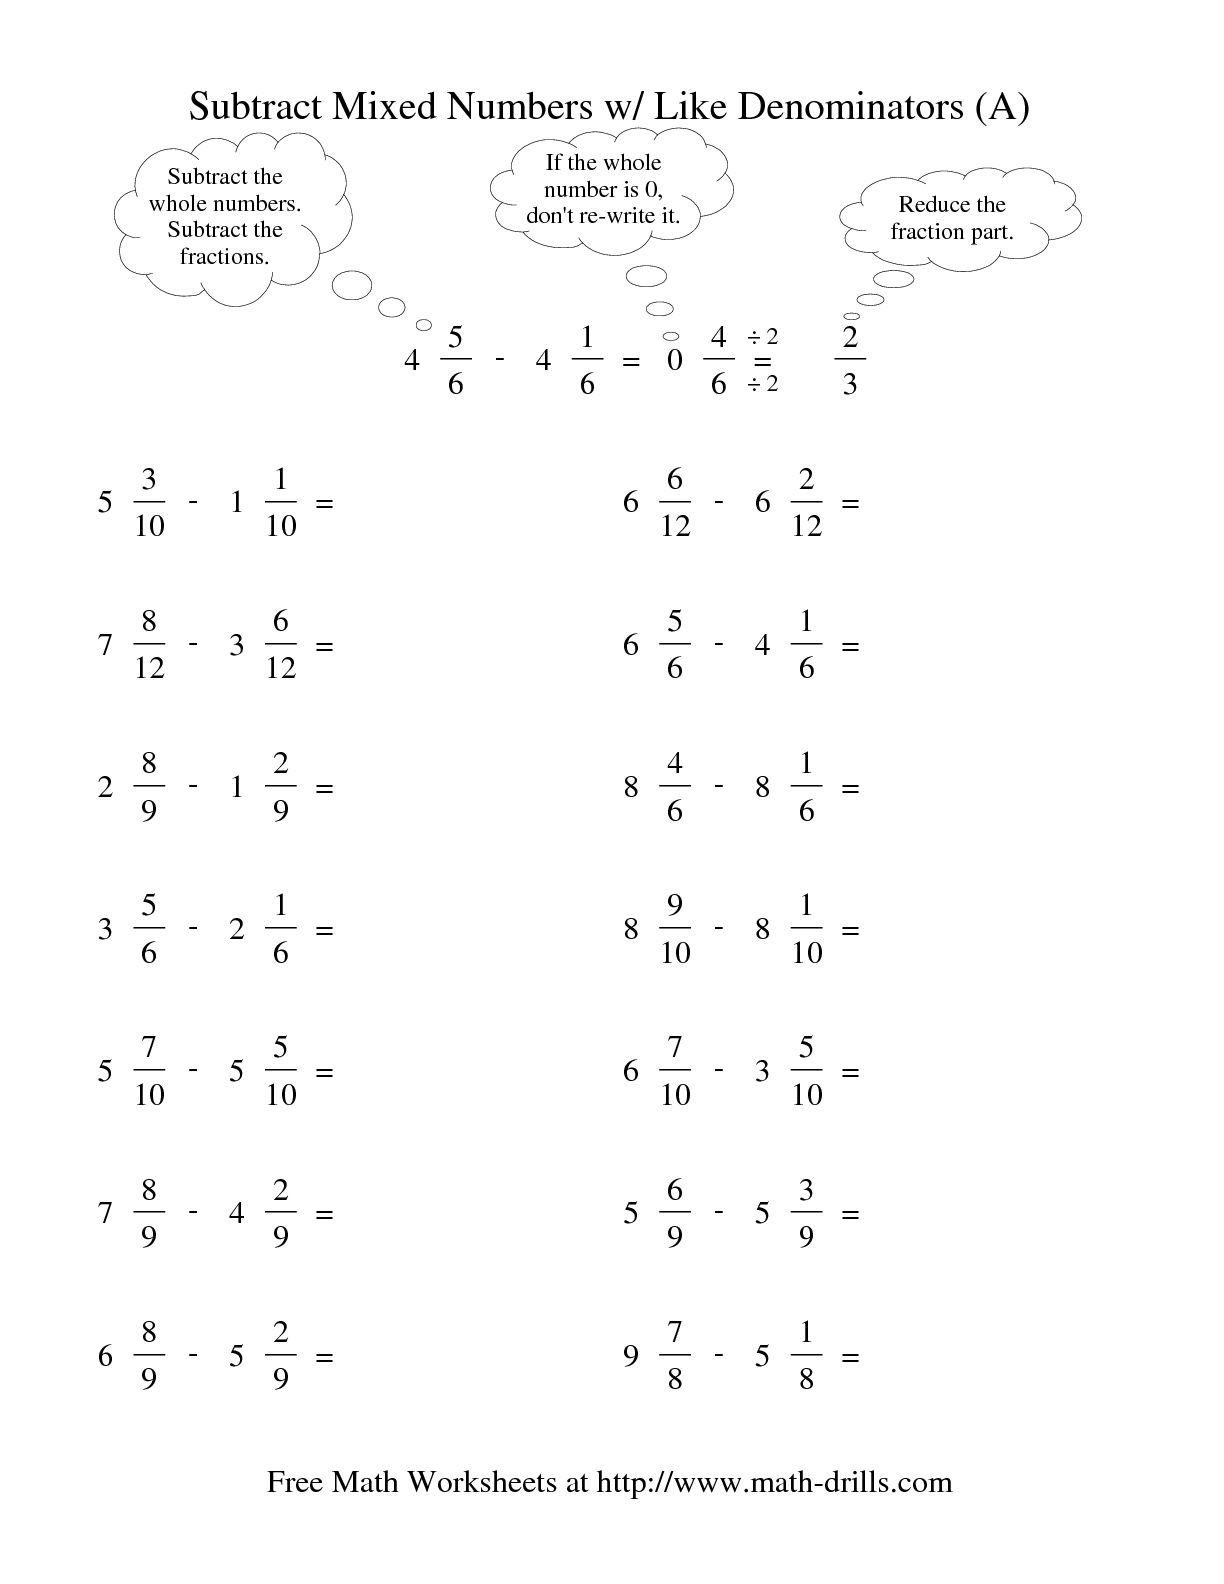 Subtracting Fractions And Mixed Numbers From Whole Numbers Worksheets